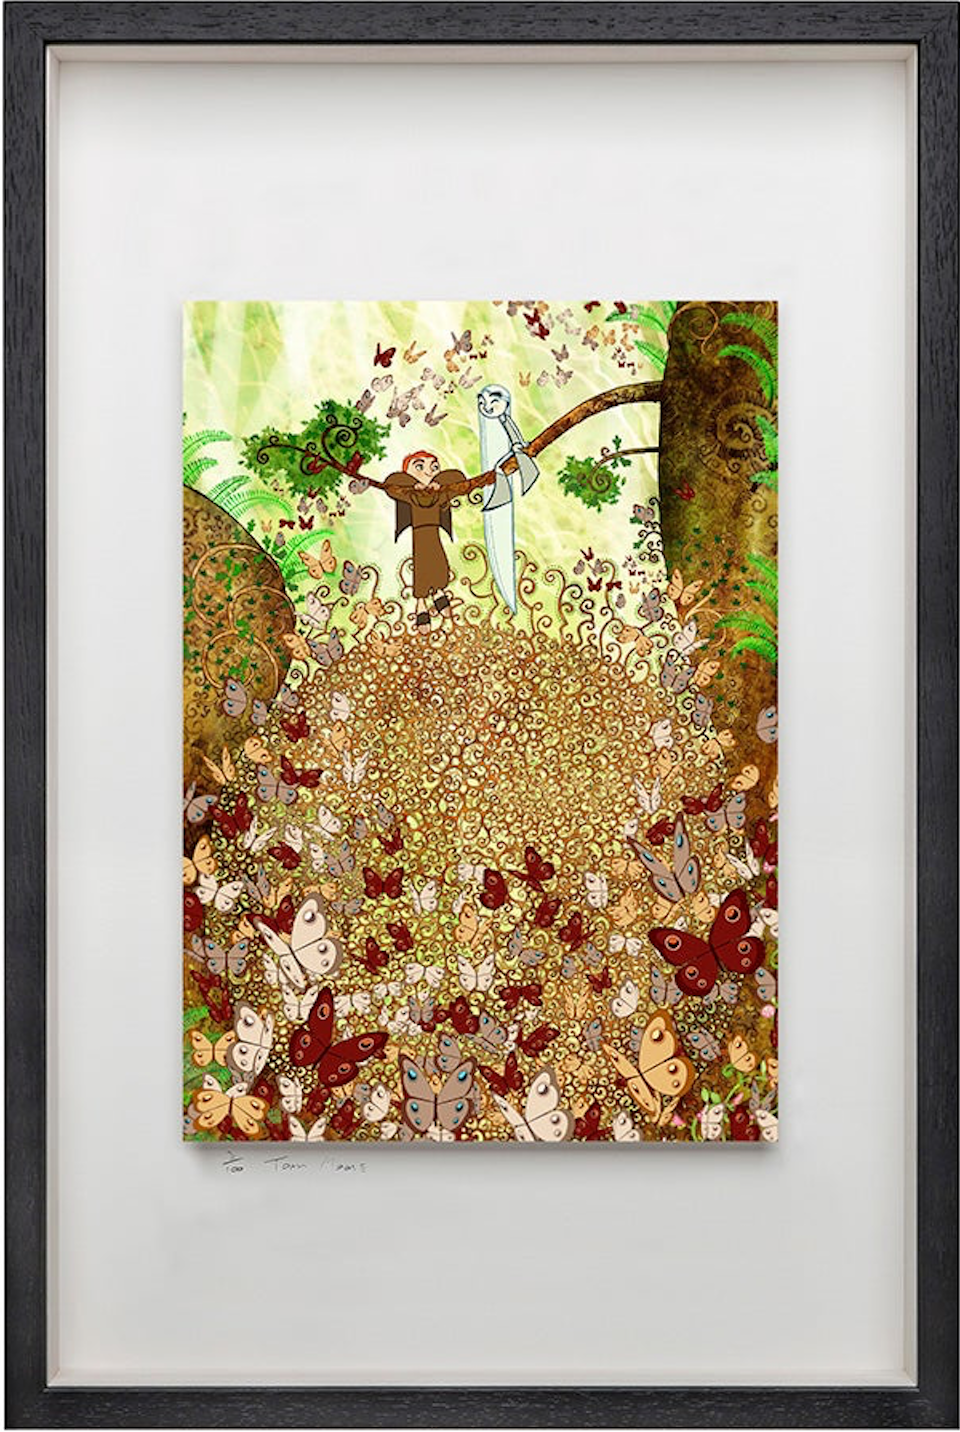 Butterfly Forest - Limited Edition Signed Print - Framed